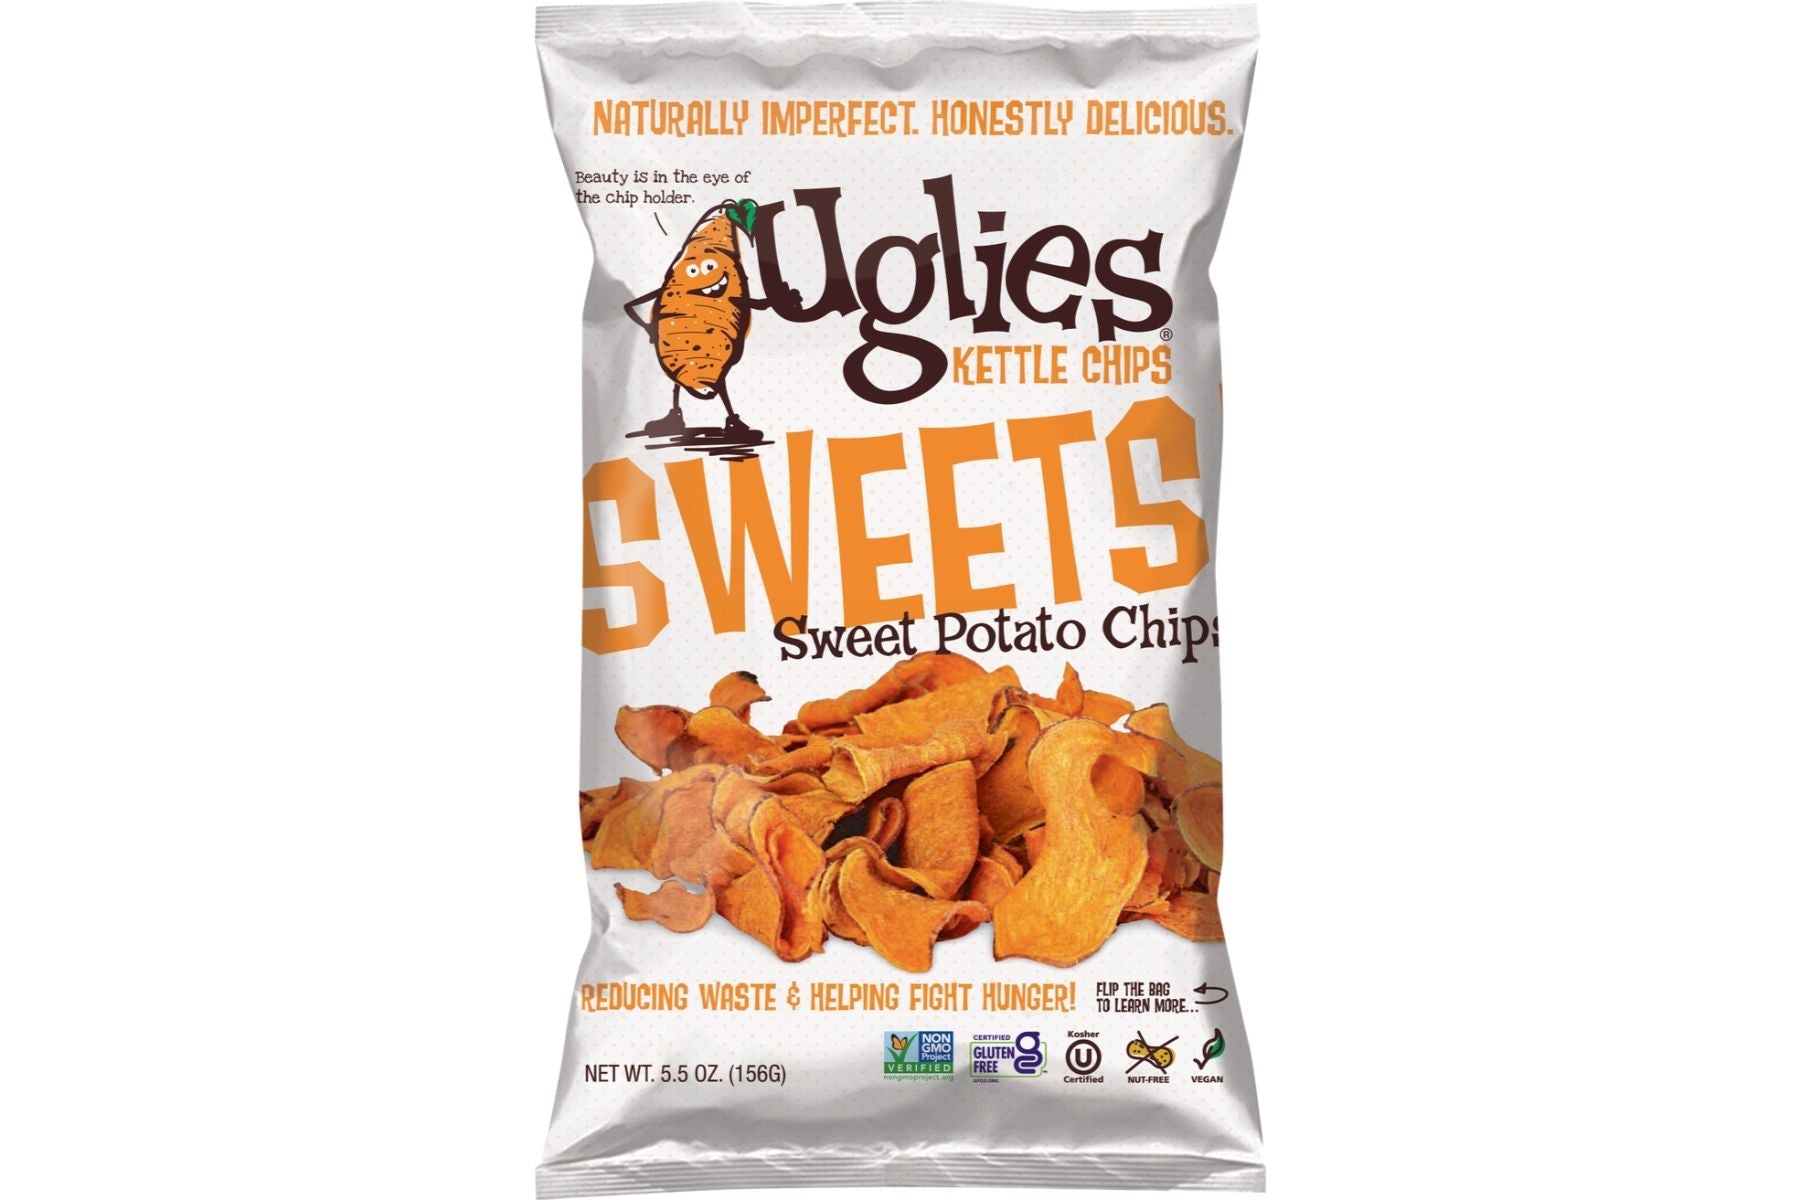 UGLIES - Case of 24 - 2oz Bags: Sweets